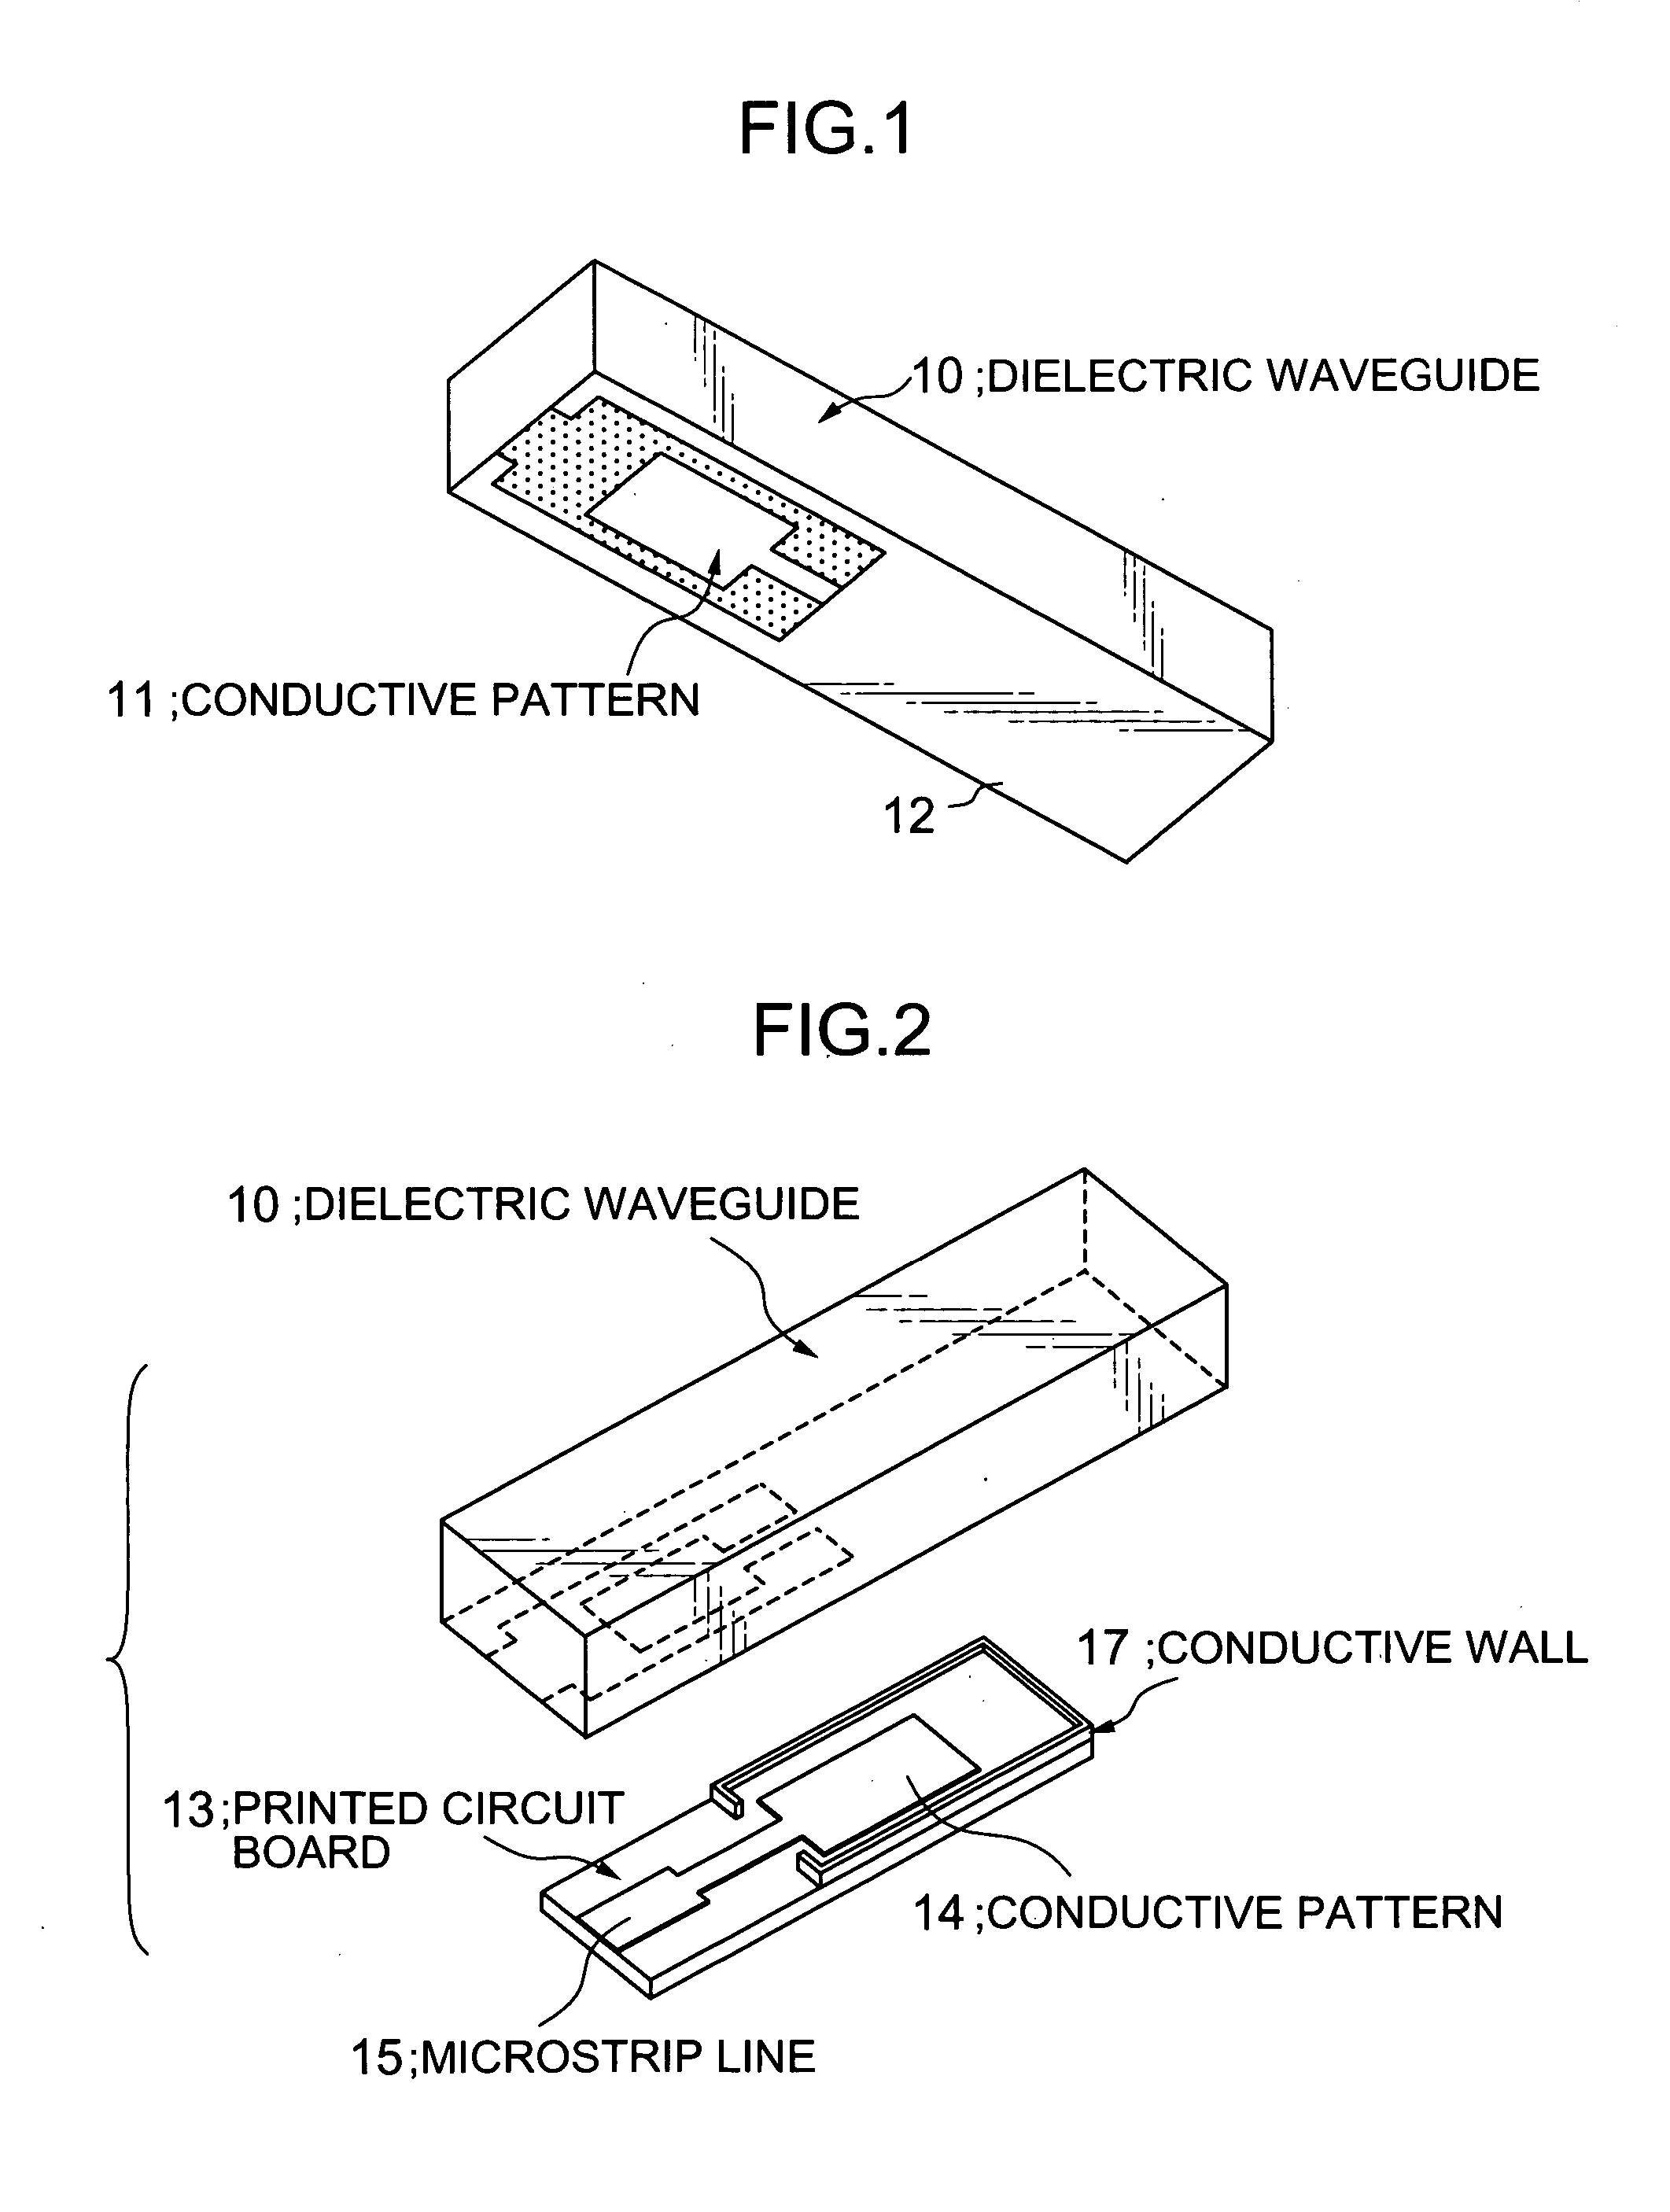 Input/output coupling structure for dielectric waveguide